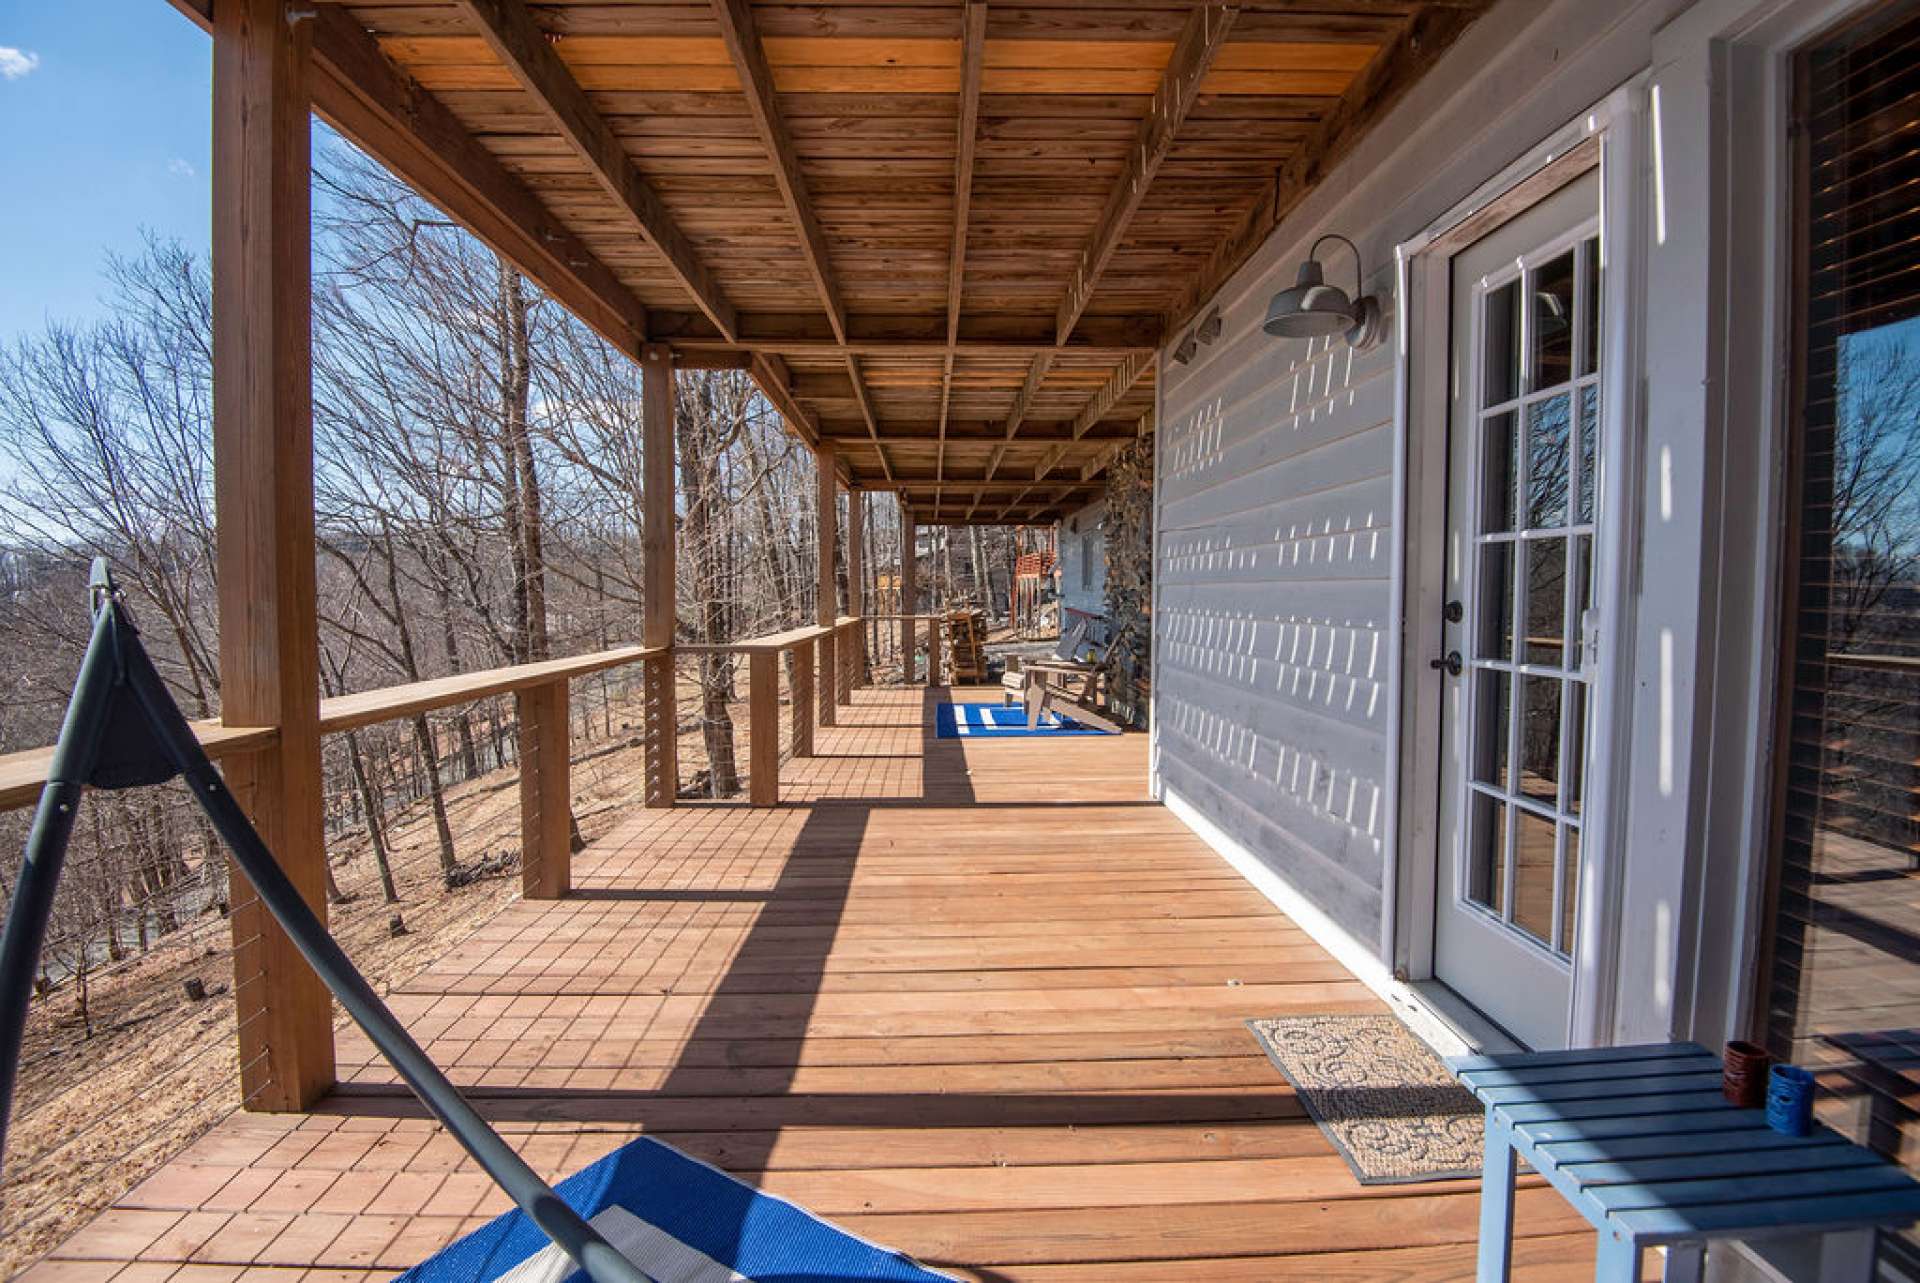 Lower level covered deck is perfect for relaxing, reading or an afternoon siesta.